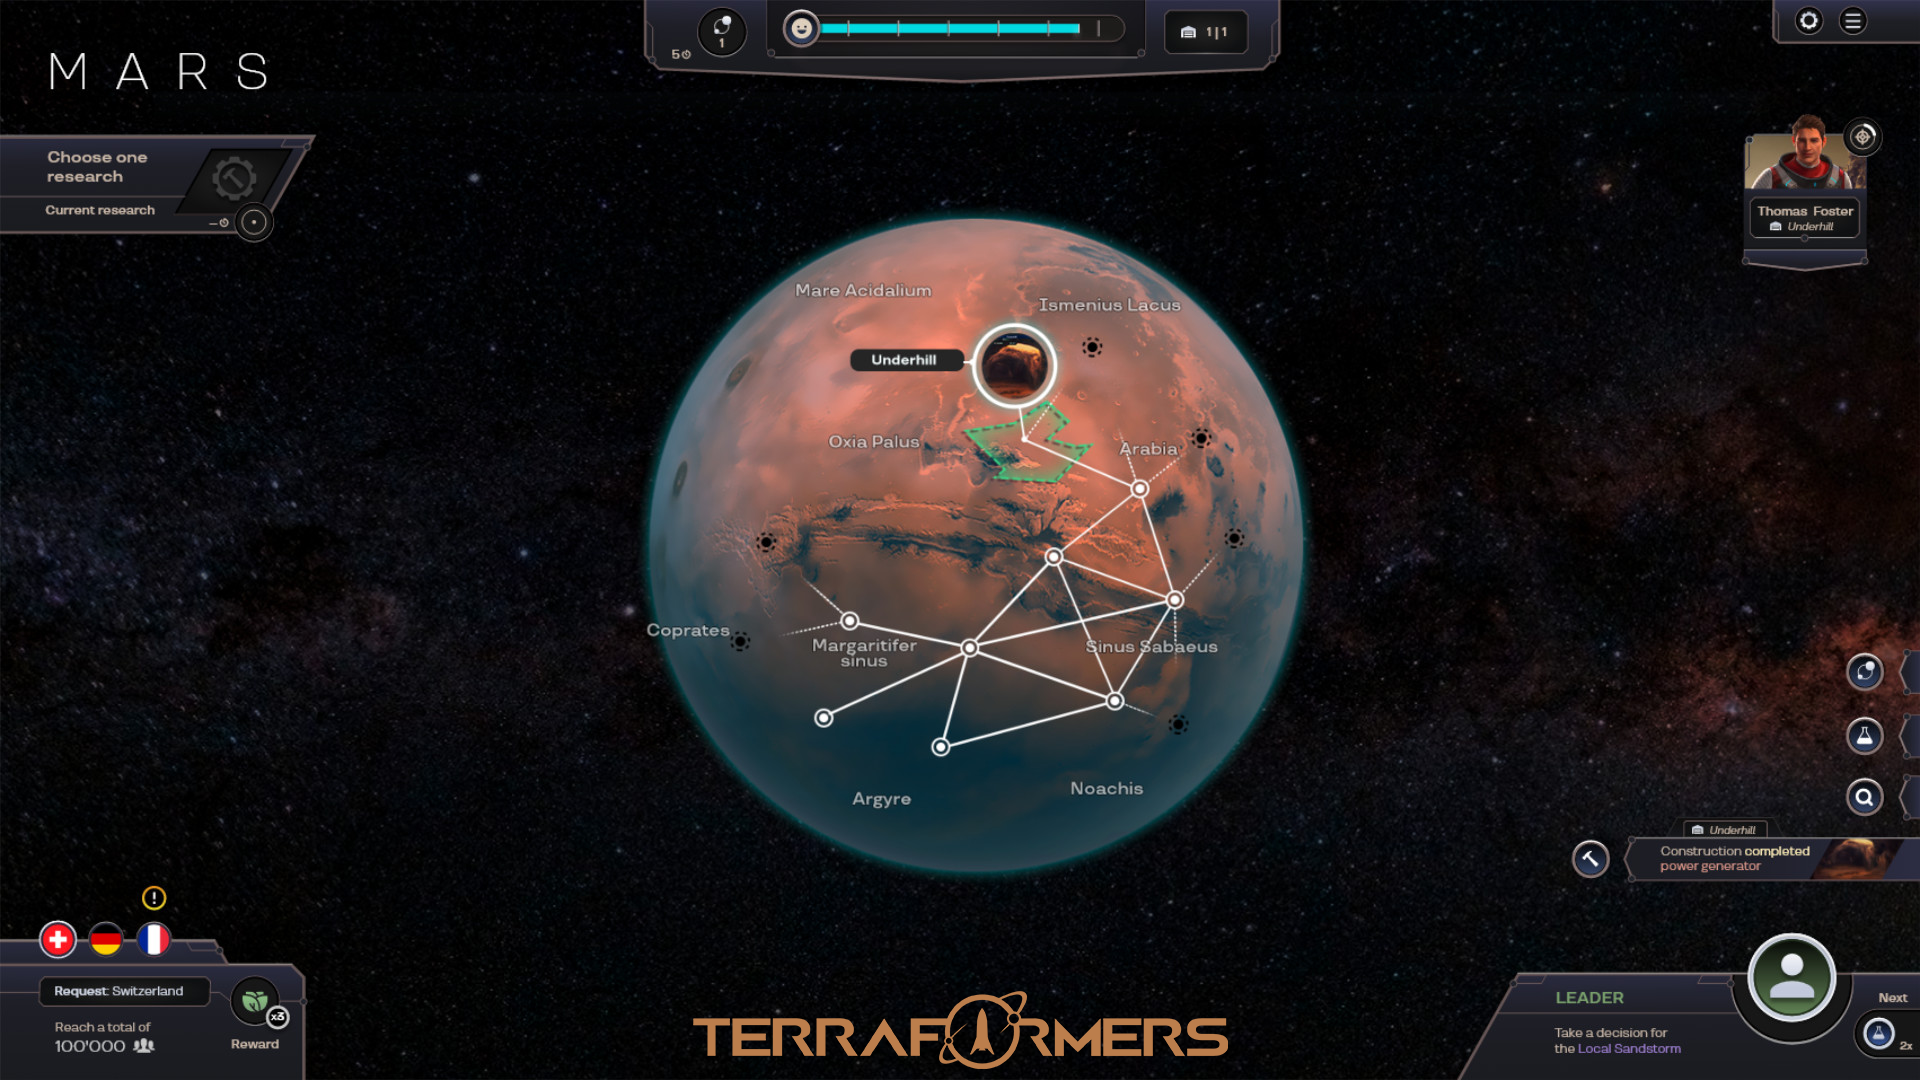 are terraformers real